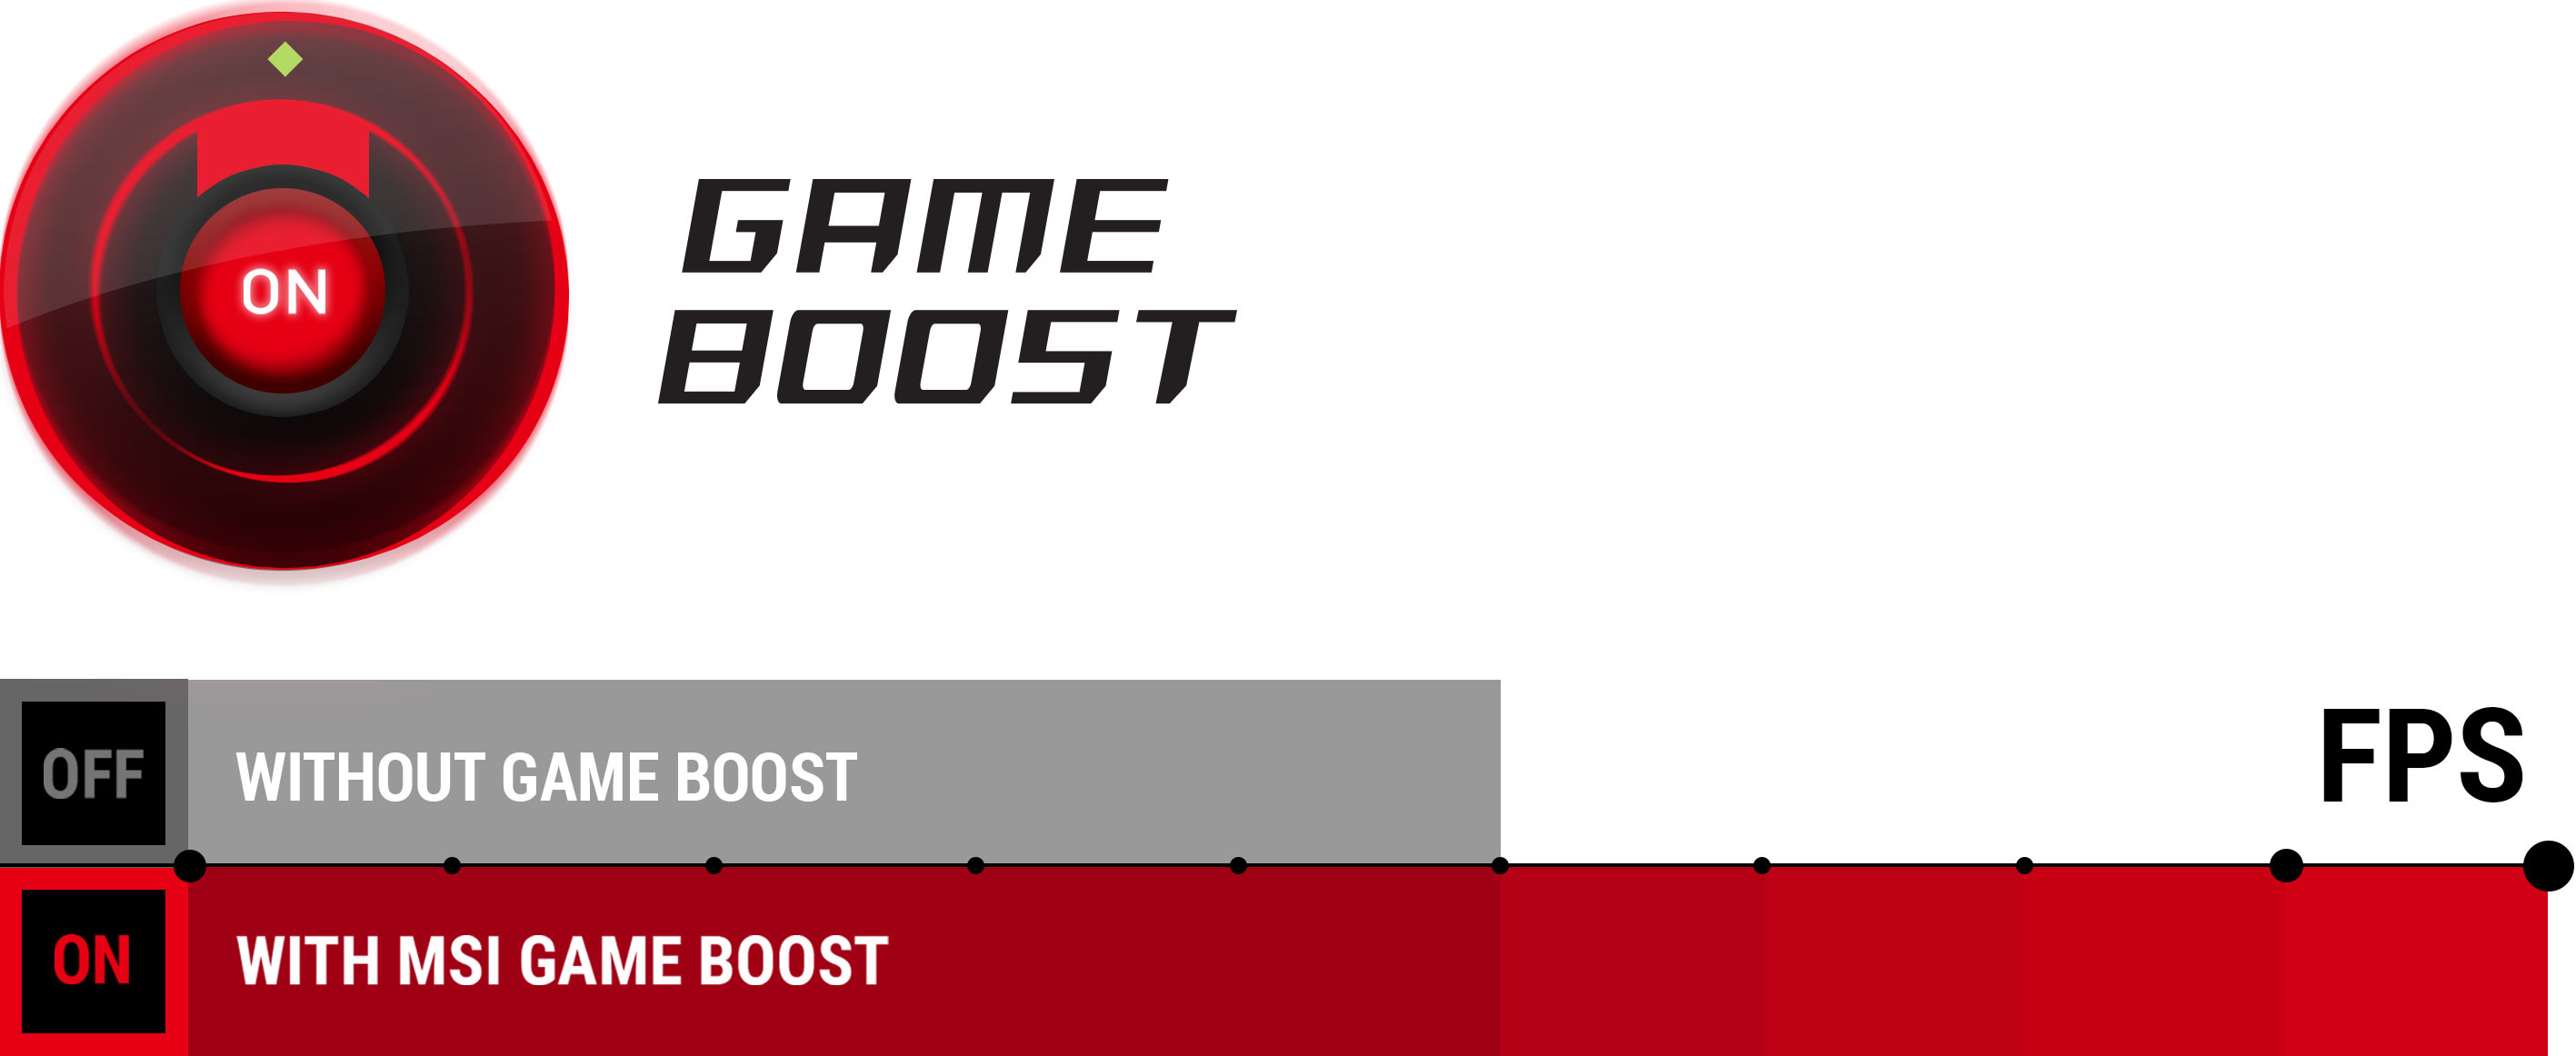 Game Boost 1 second overclocking